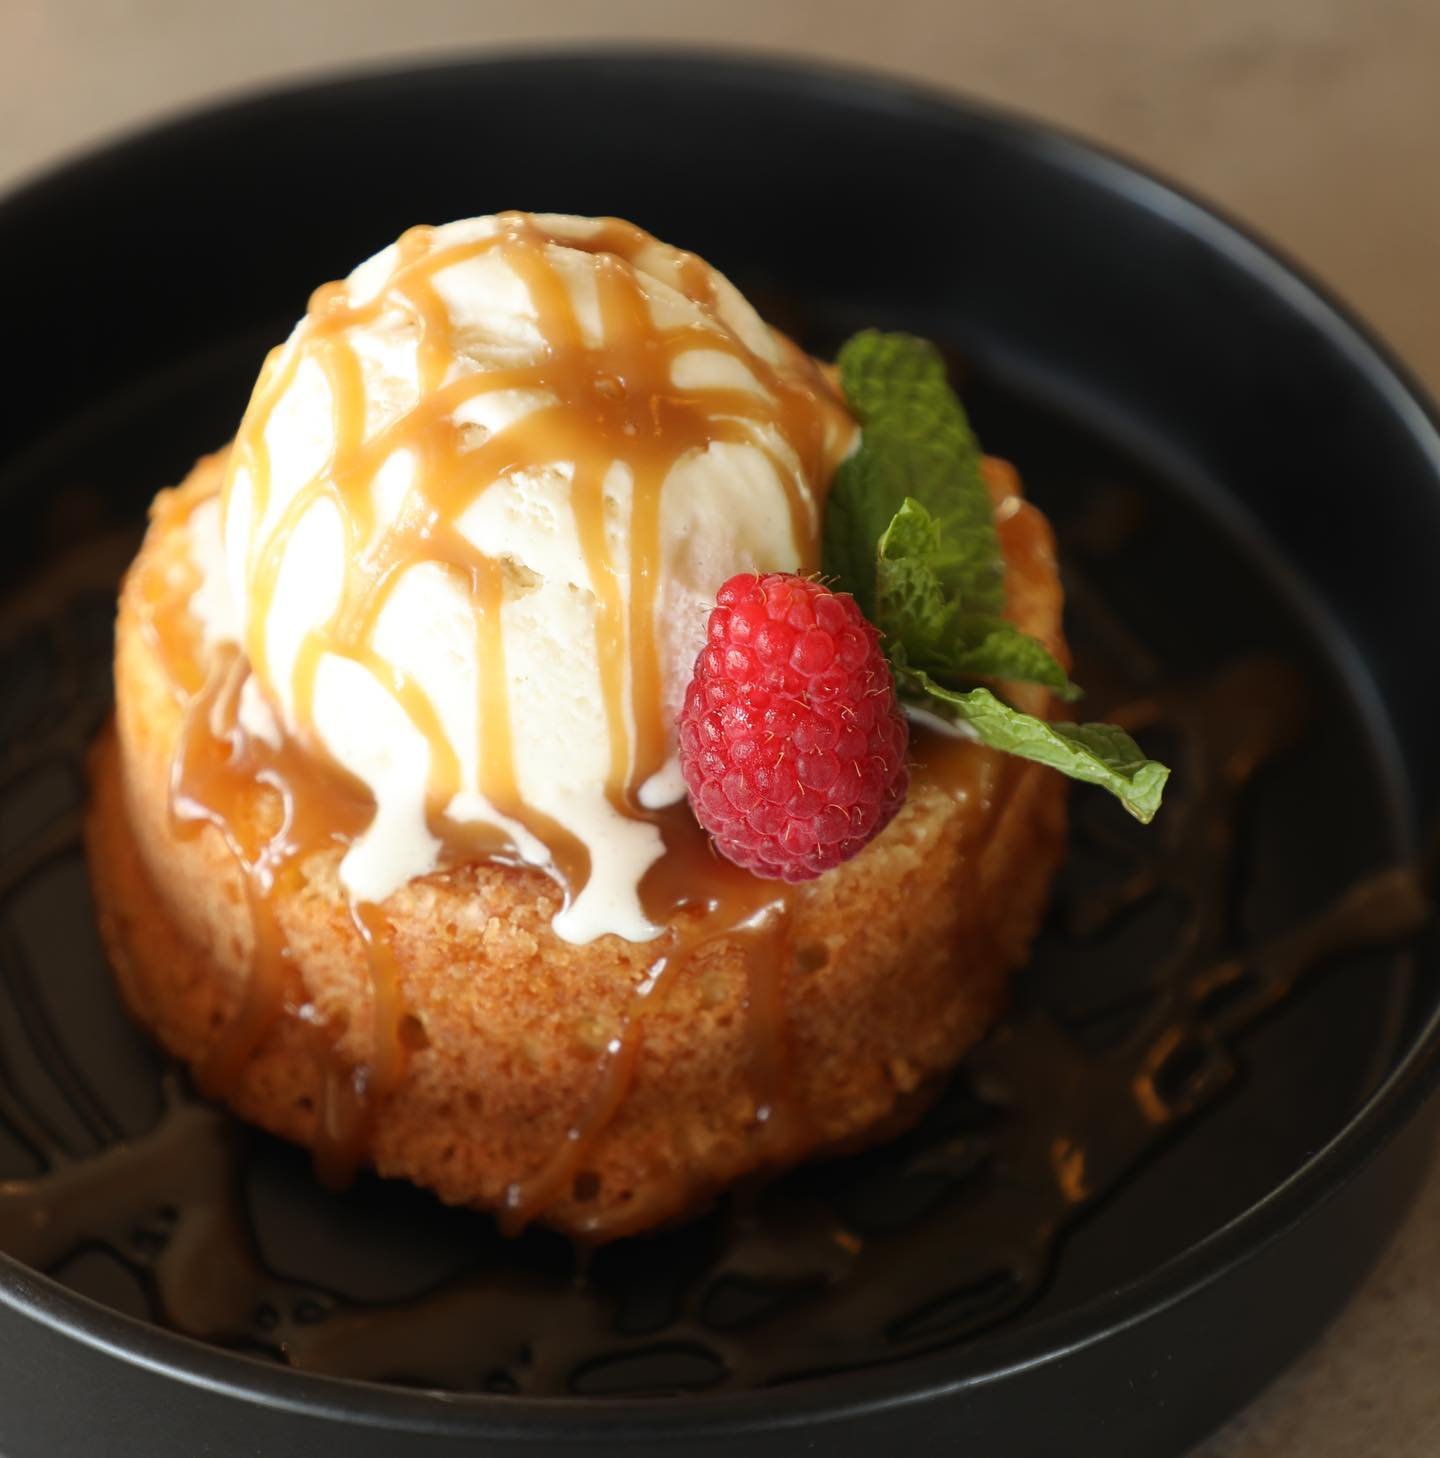 Proceed with deliciousness: Eating our Pineapple Pound Cake may cause uncontrollable hula dancing and spontaneous outbreaks of island themed karaoke. 🍍
 
Topped with vanilla ice cream and butterscotch bourbon sauce&hellip; need we say more!